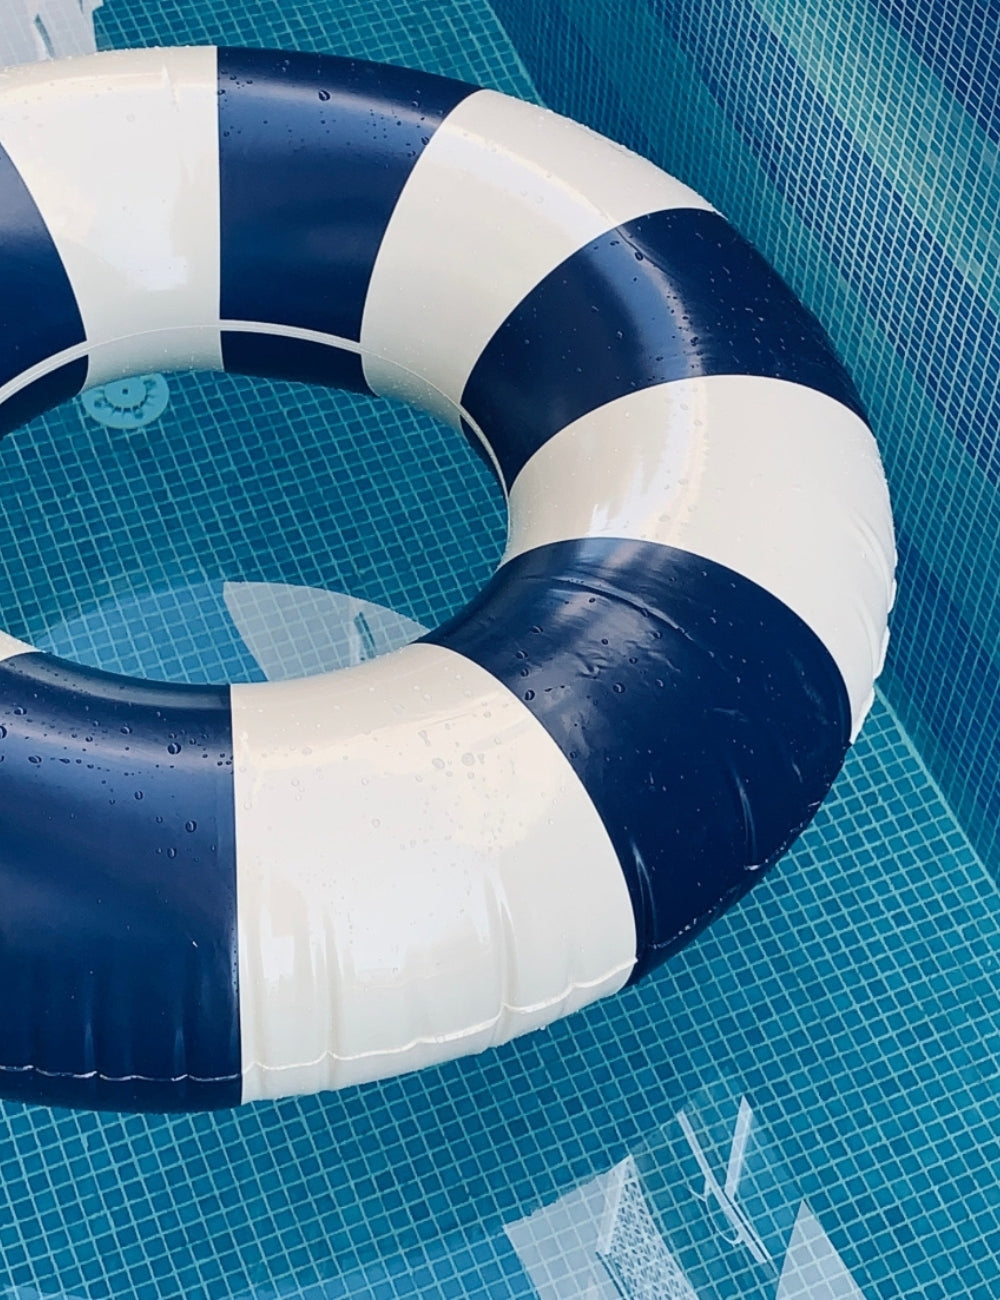 Navy Blue pool float up close